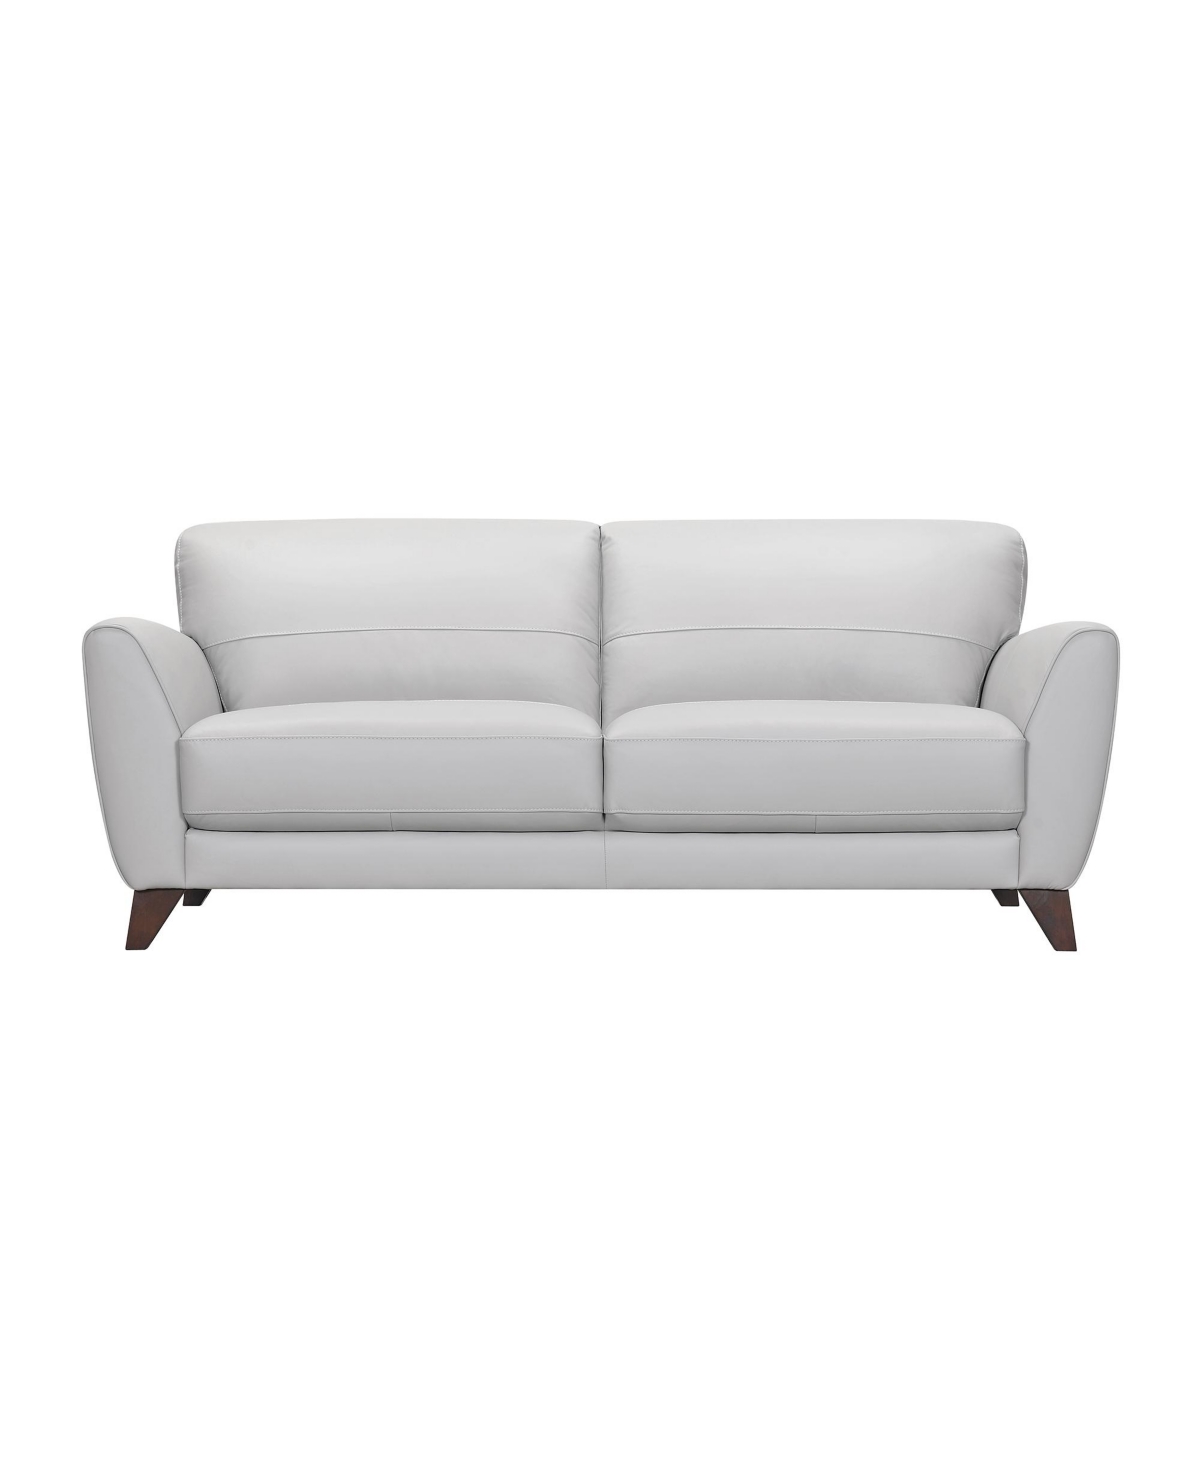 Armen Living Jedd 82" Genuine Leather With Wood Legs In Contemporary Sofa In Dove Gray